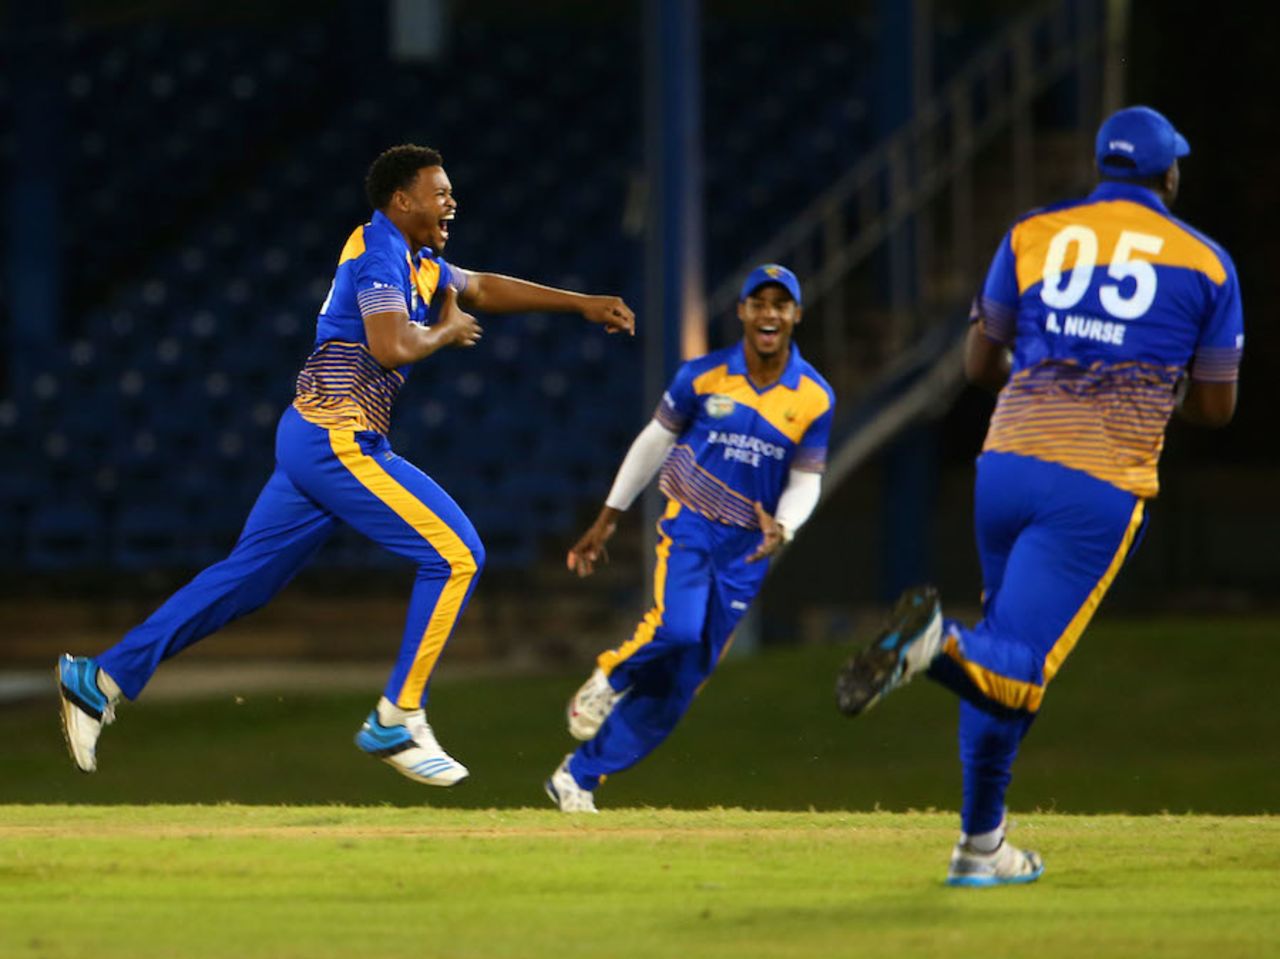 Javon Searles is pumped after taking a wicket, Barbados v Guyana, Nagico Super50 2015, Port of Spain, January 17, 2015